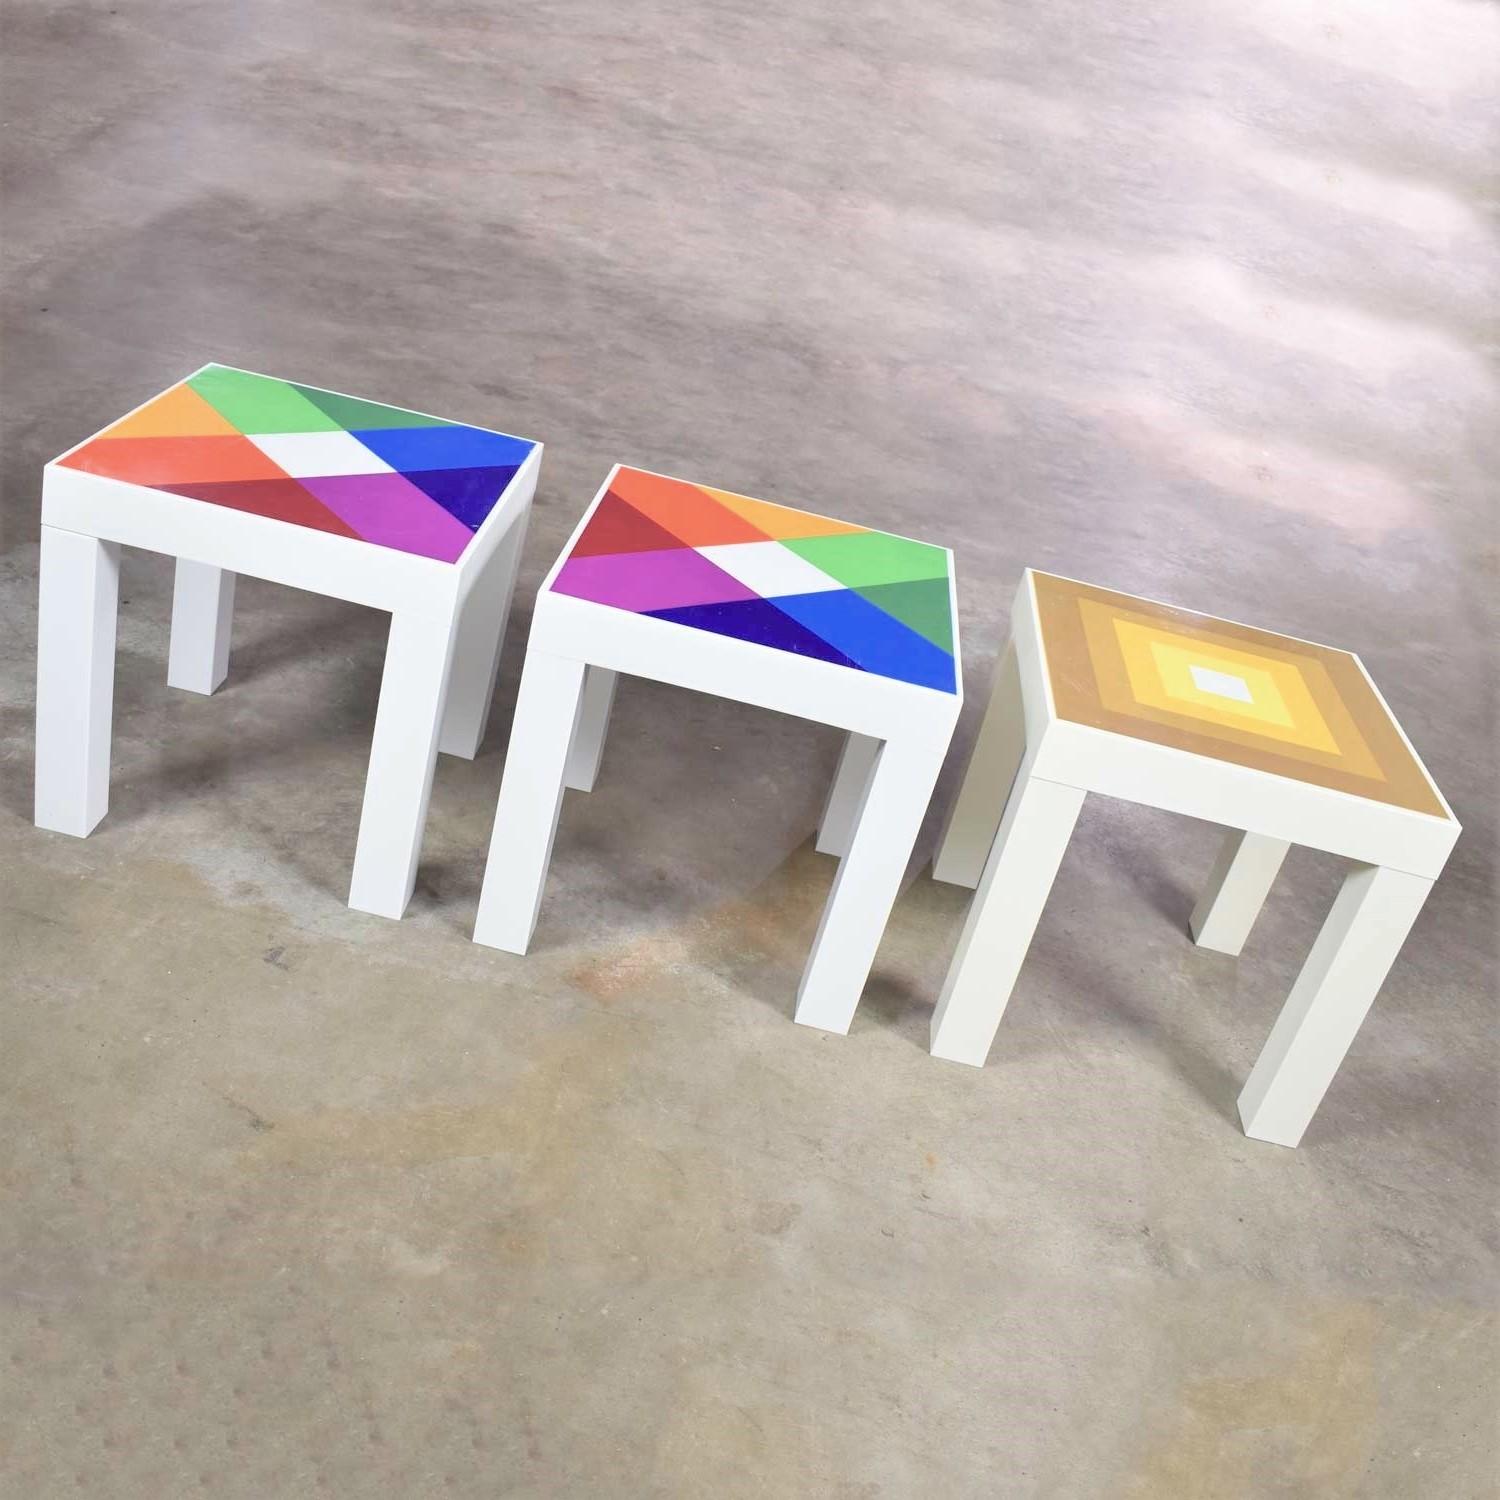 Trio Mod Pop Art Plastic Parsons Style Square Side Tables Style Kartell or Syroc For Sale 2